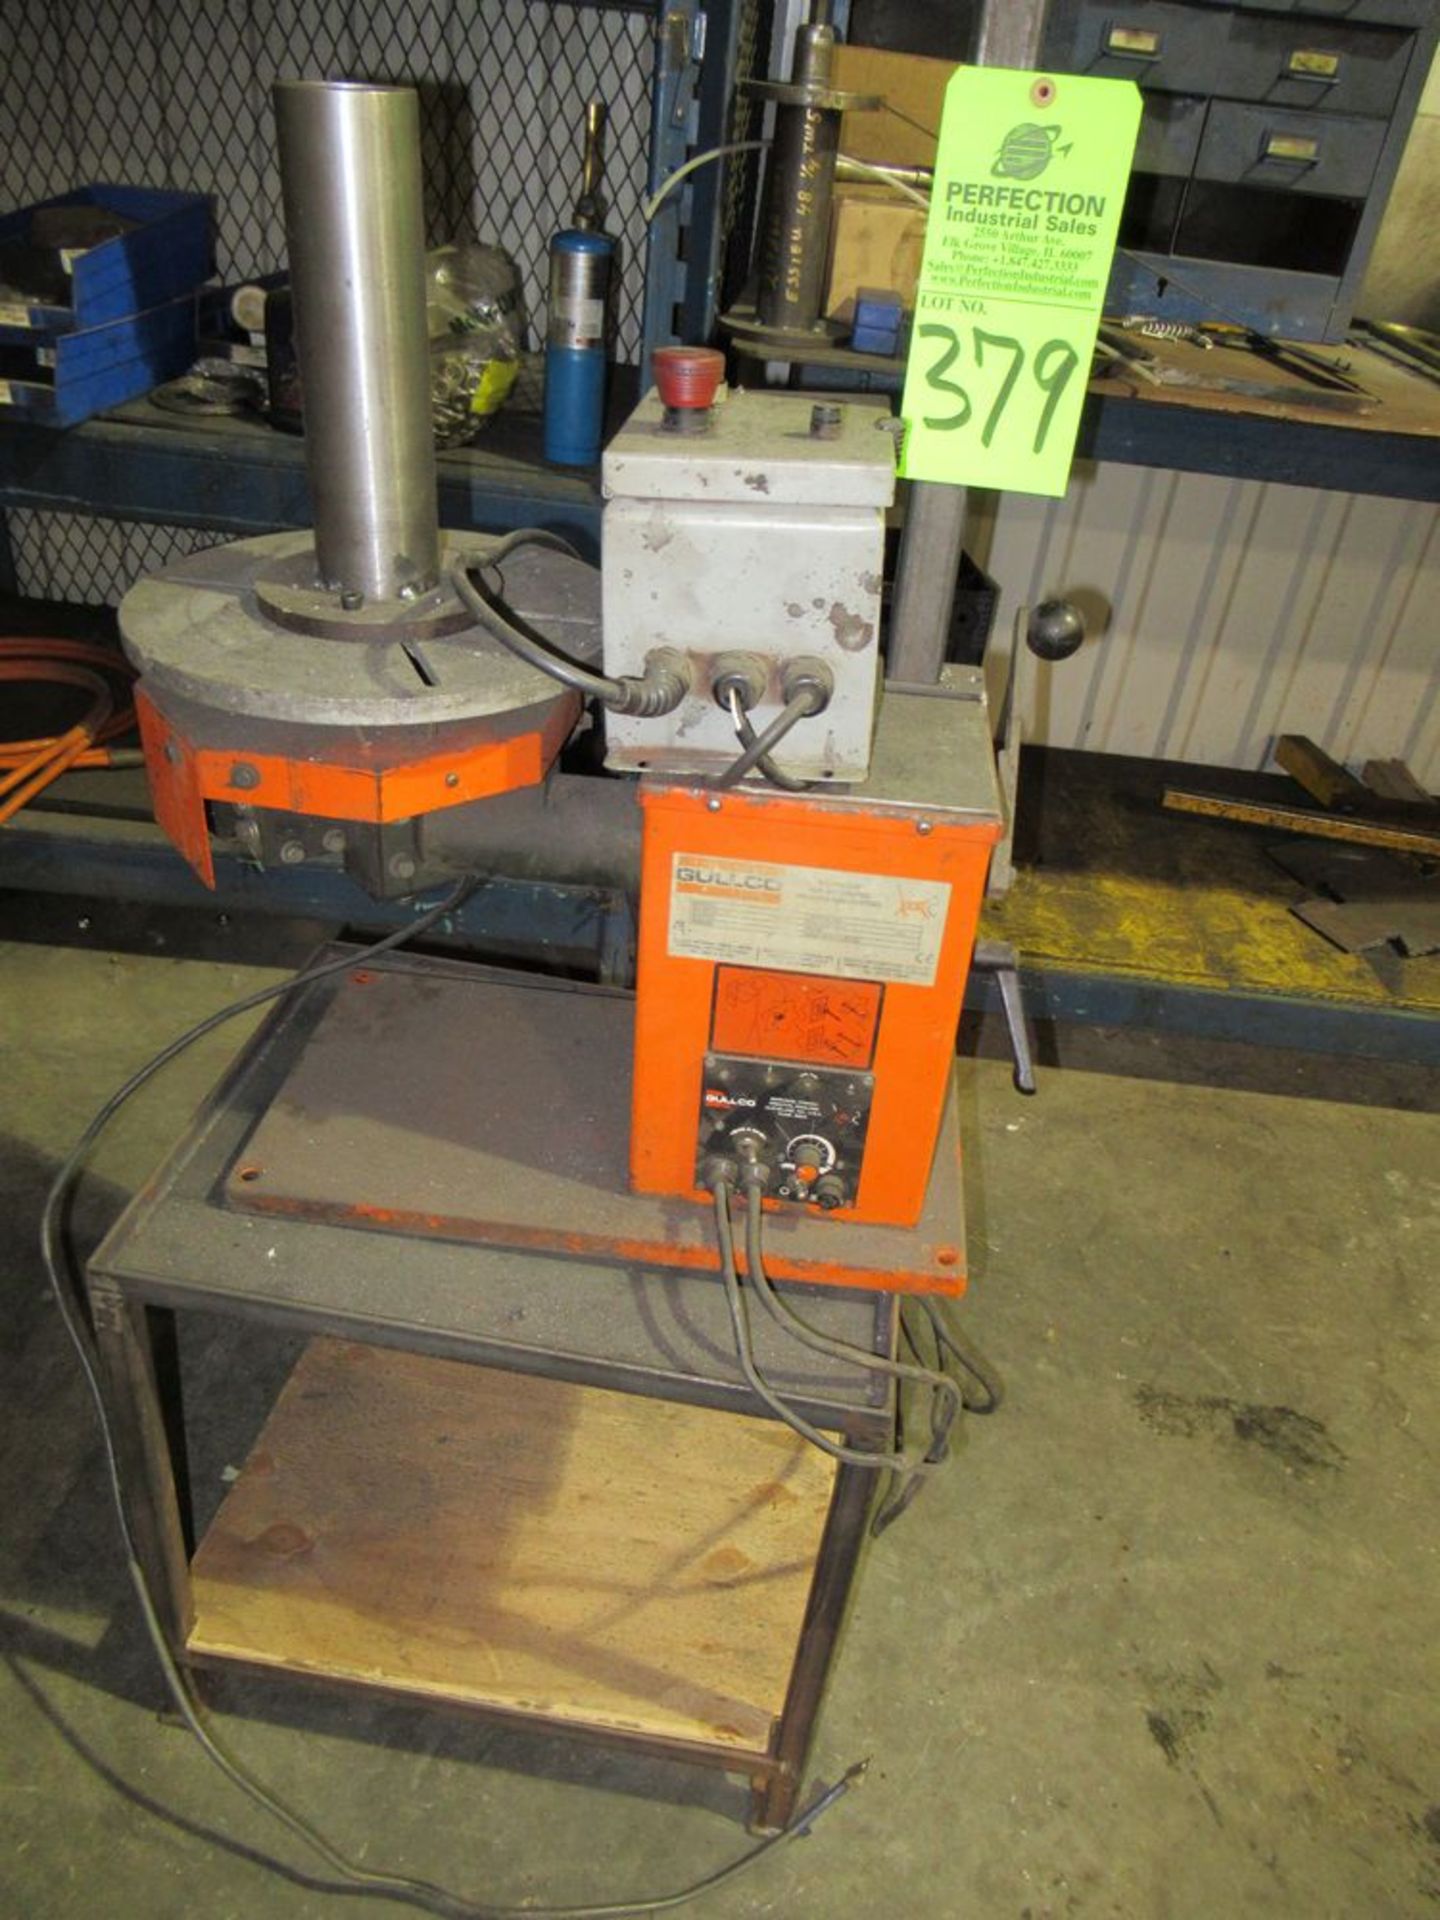 Gullco Equip. For Automated Welding & Cutting Turn Table ( Loc. Upstairs ) ($25 Rigging Cost) - Image 2 of 3